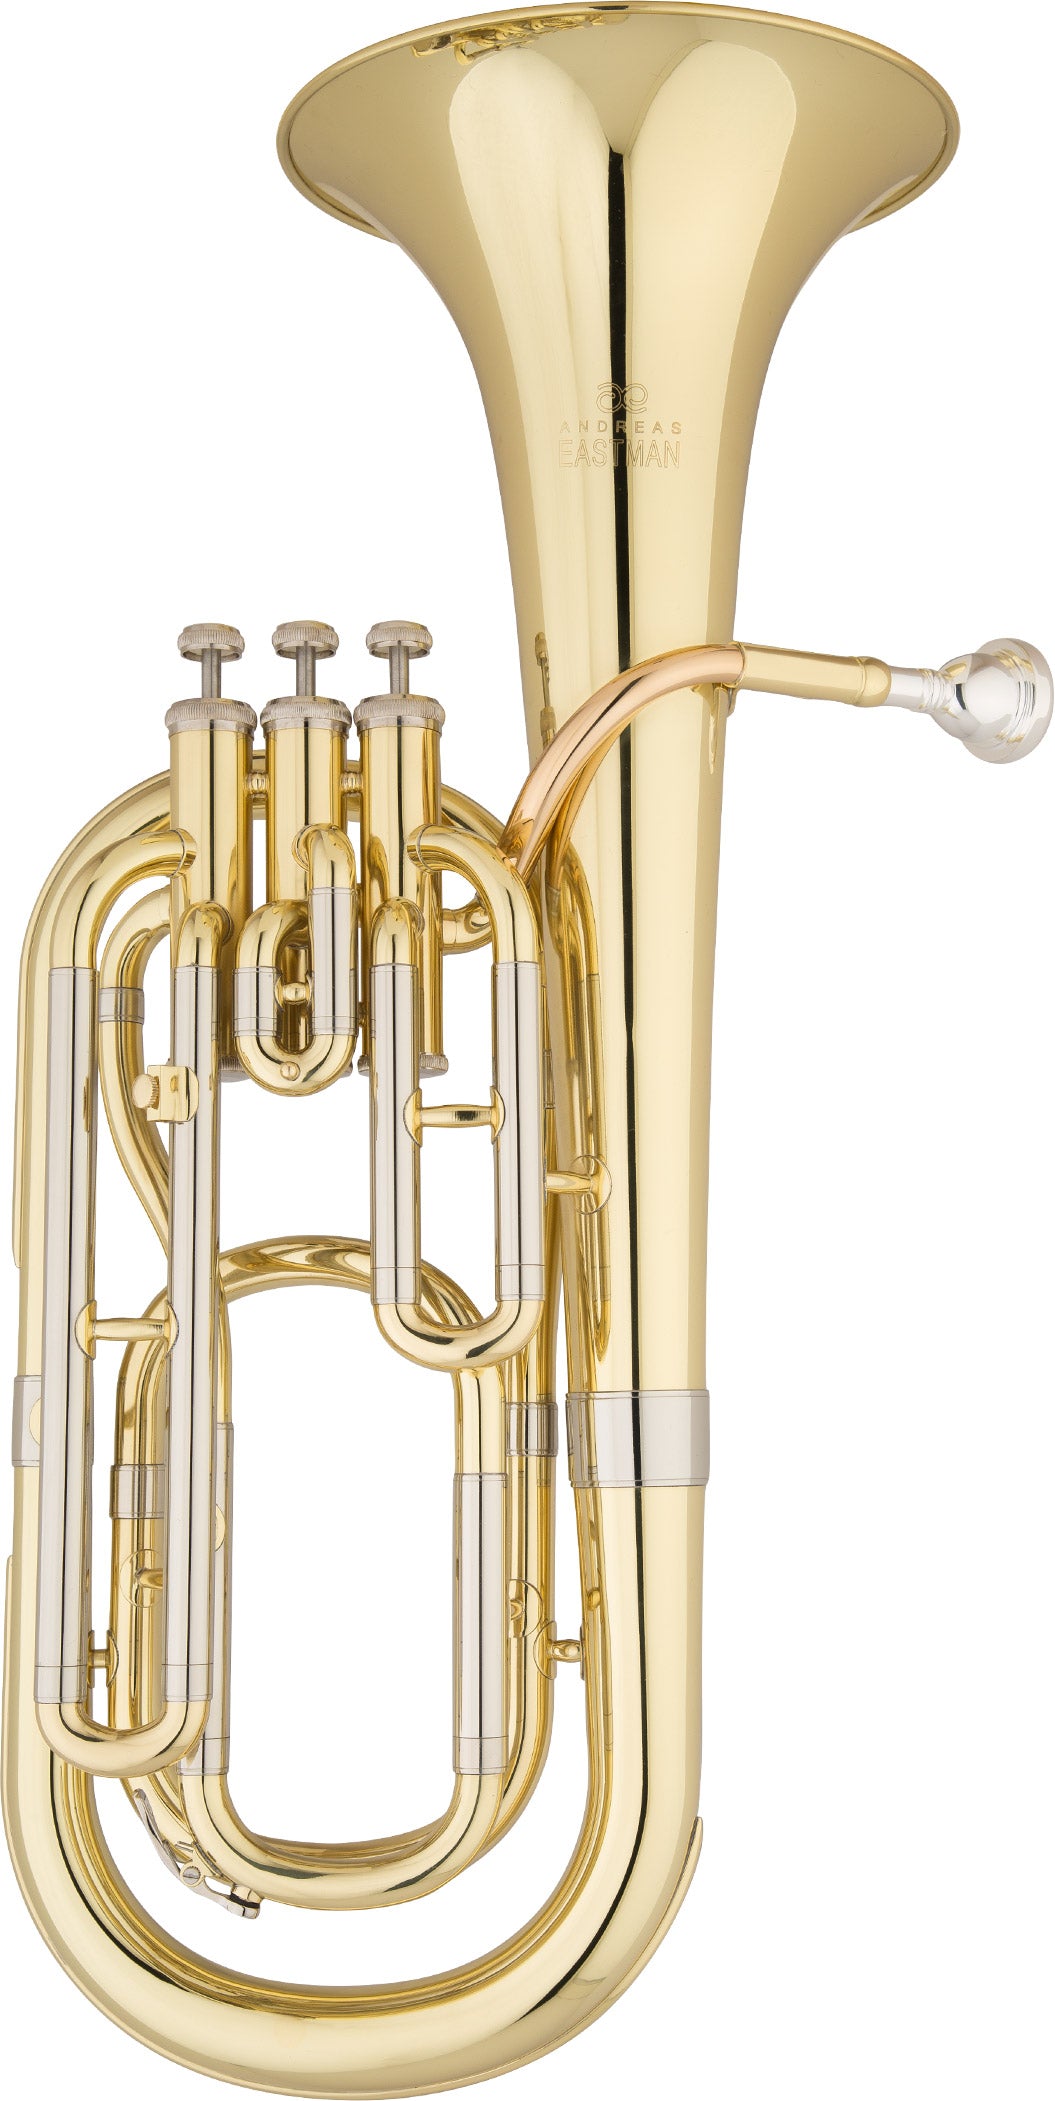 Andreas Eastman baritone horn outfit, lacquer finish